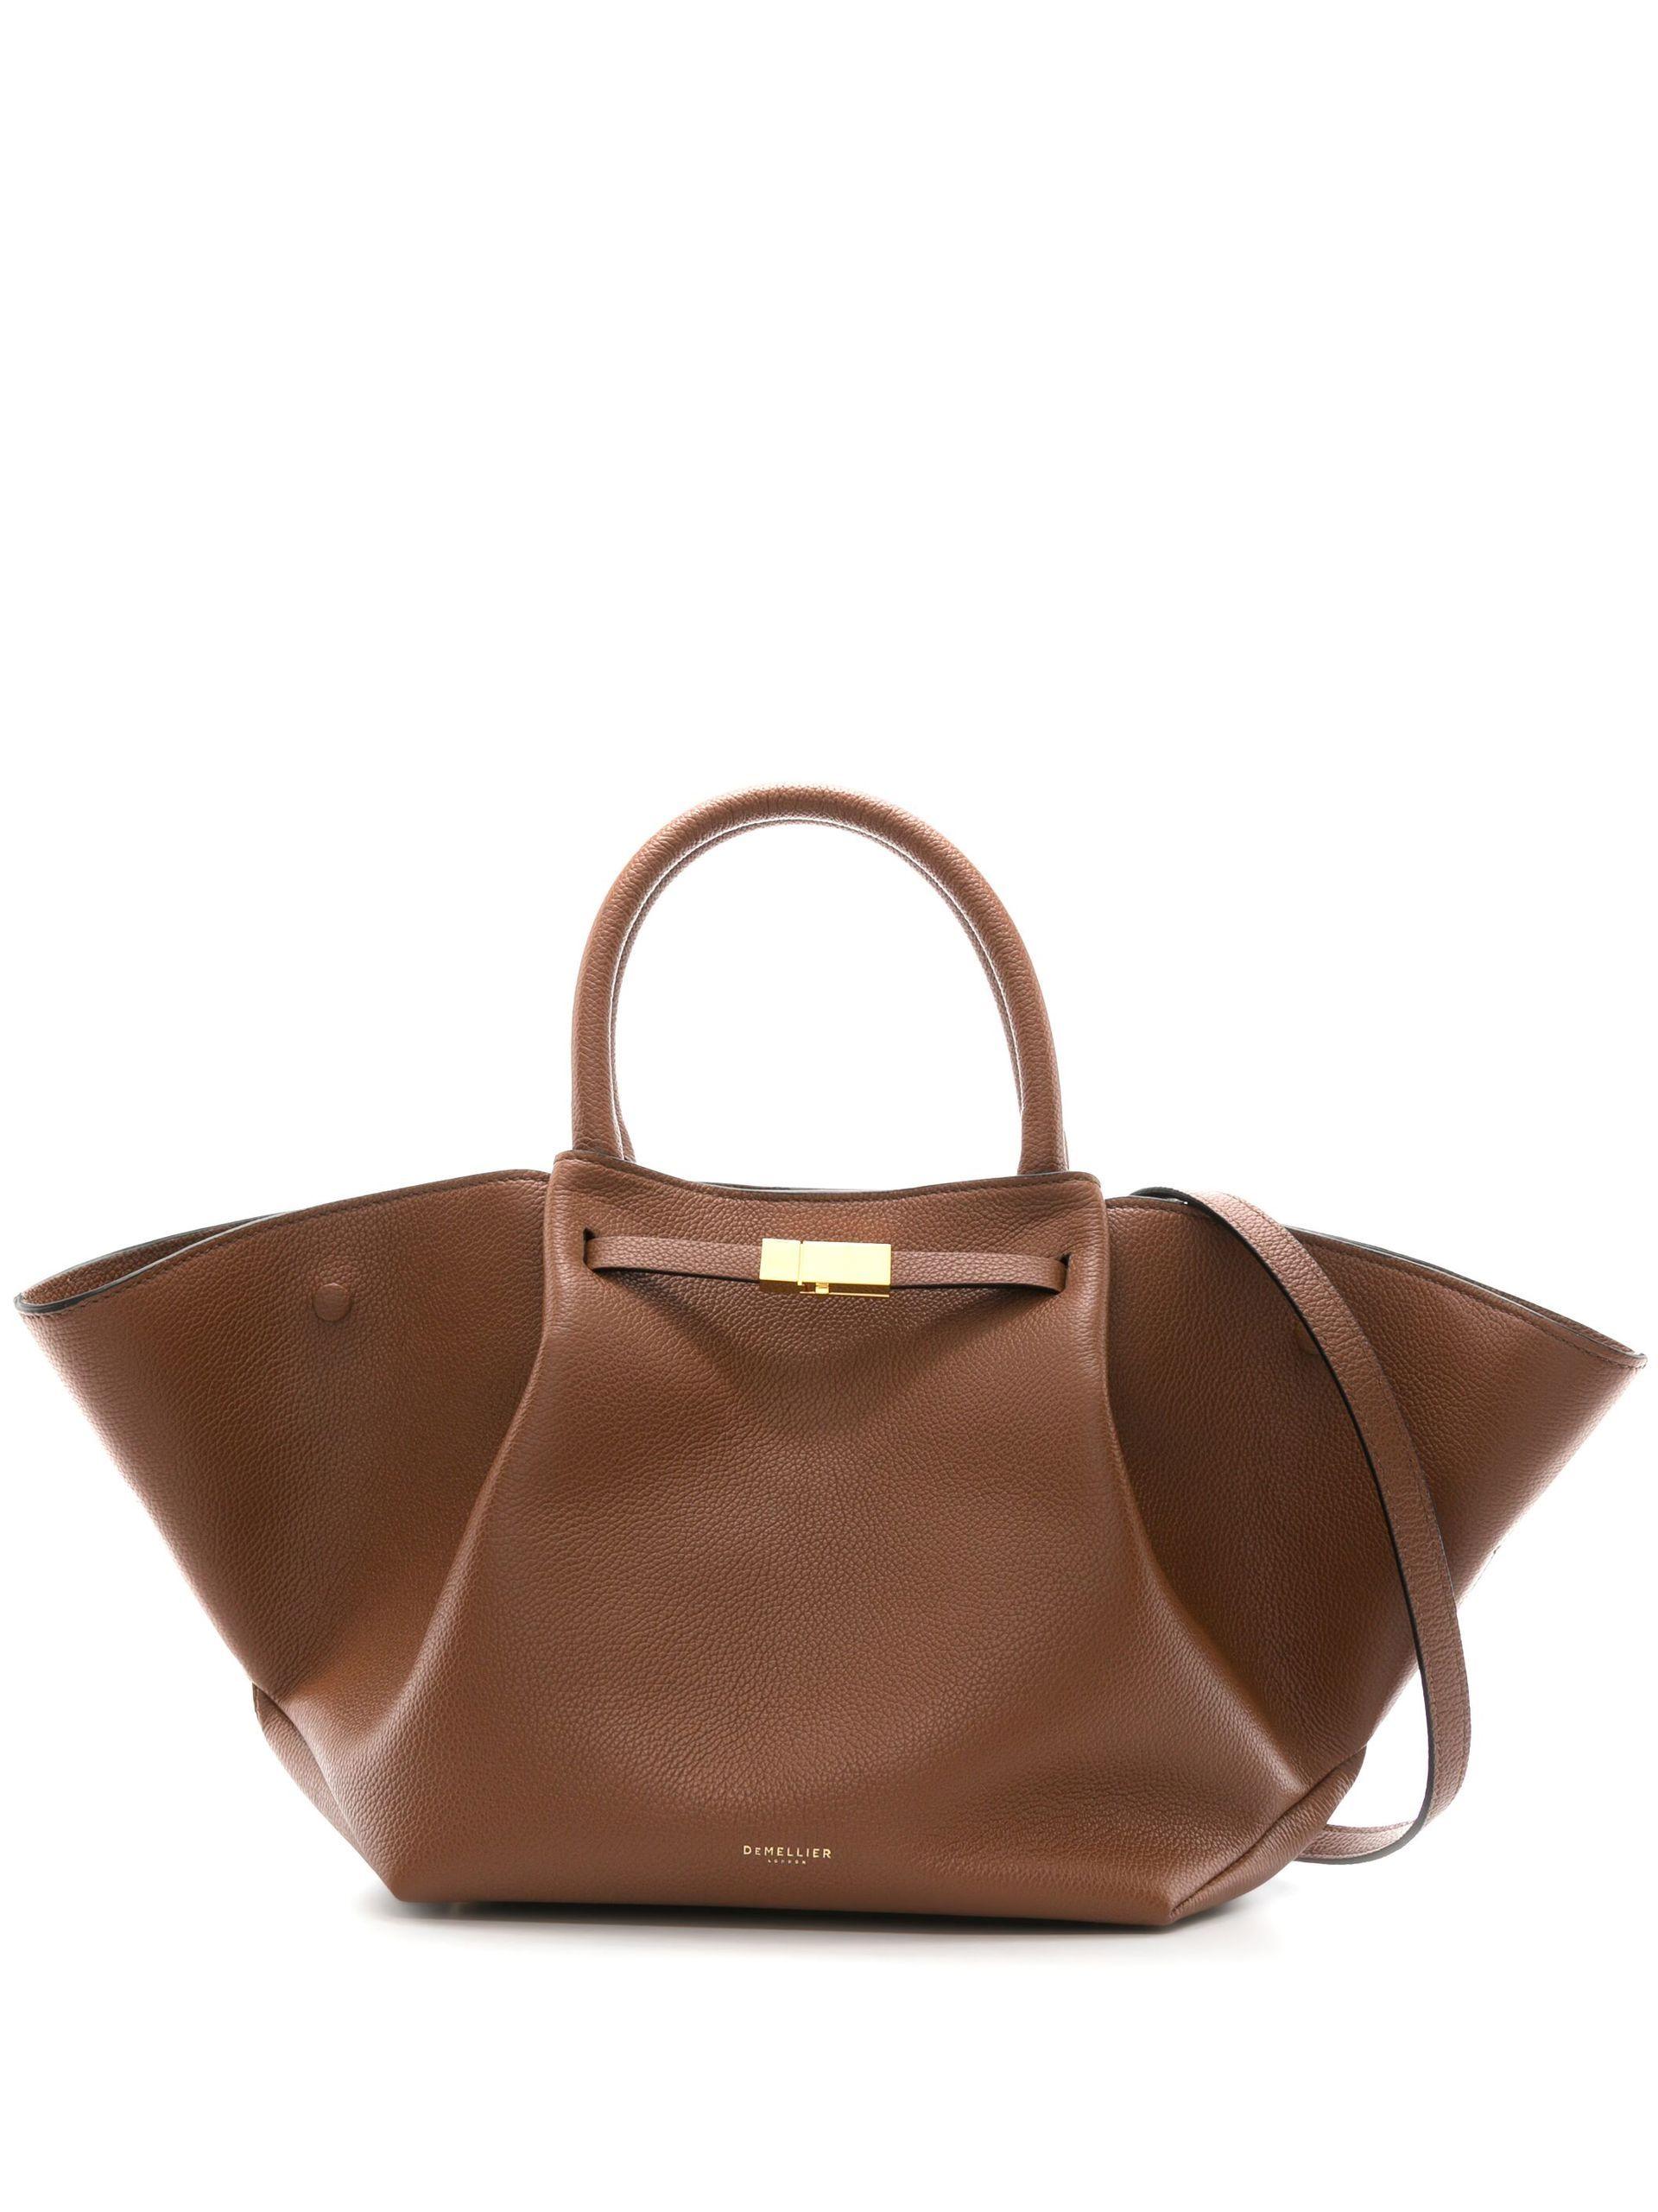 DeMellier The Midi New York Leather Tote Bag in Brown | Lyst